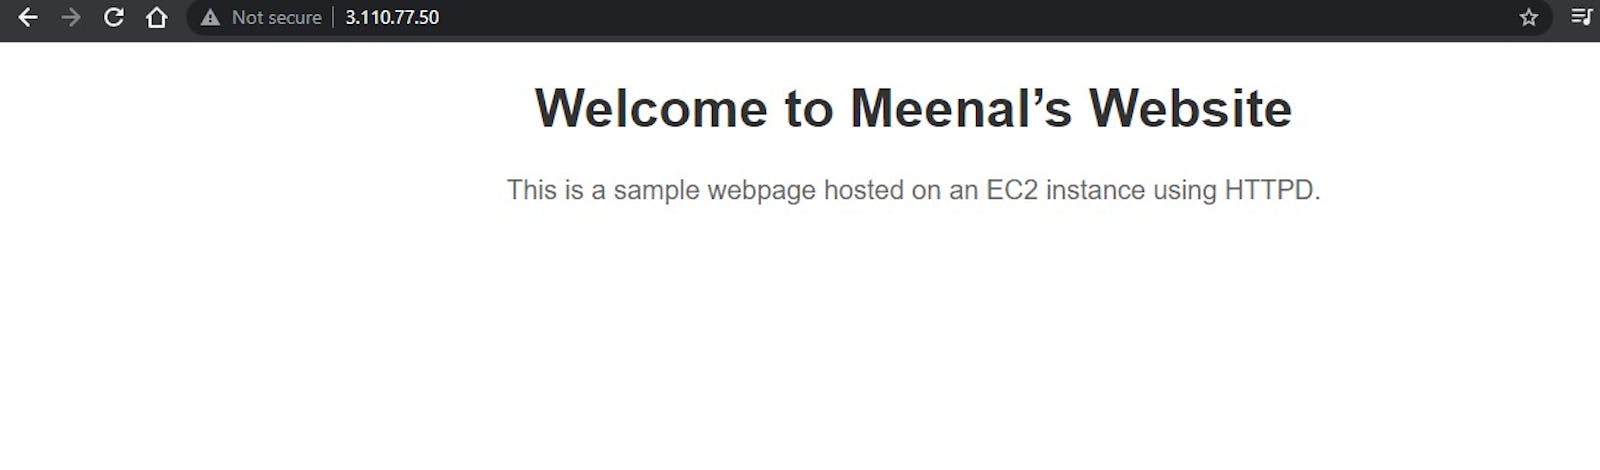 Setting up and Hosting a Website on an EC2 Instance using SSH.